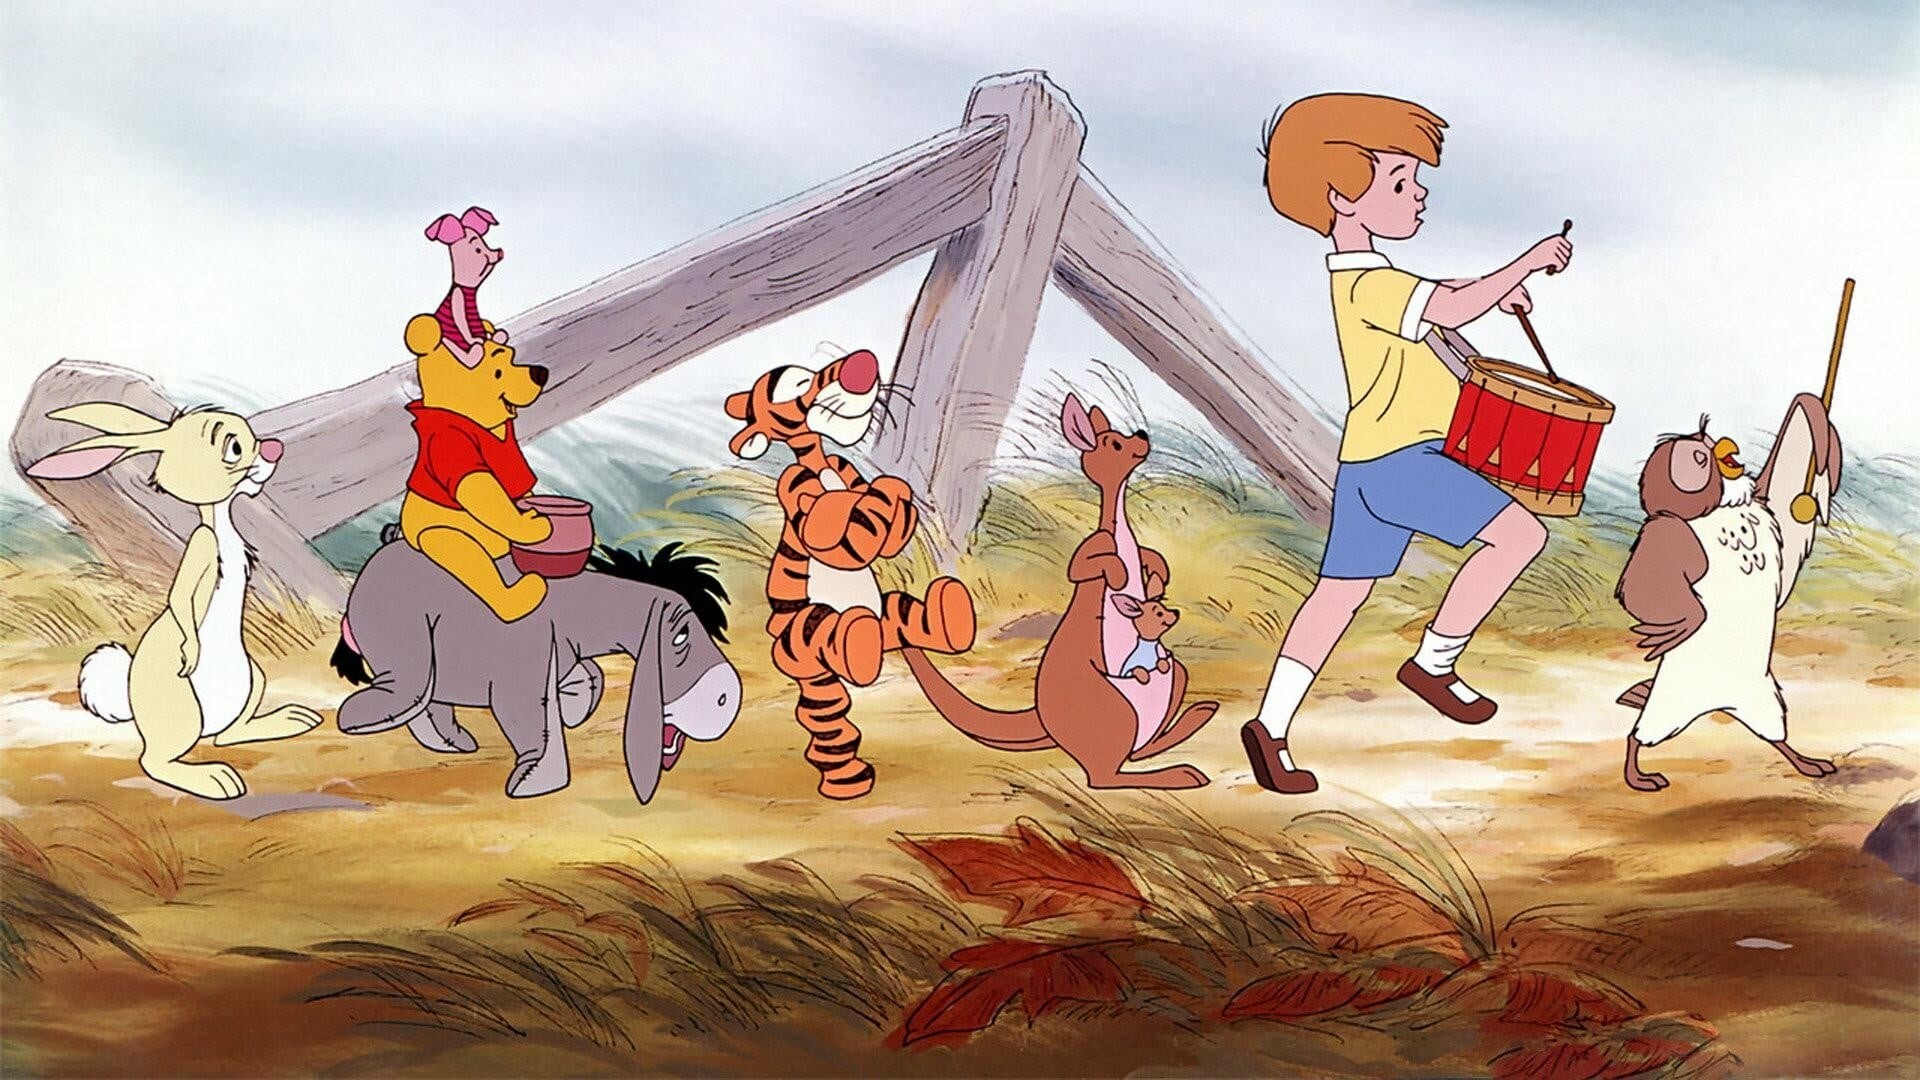 The Many Adventures of Winnie the Pooh: The roly-poly little bear and his animal friends plus Christopher Robin find themselves in one ticklish situation after another, 1977. 1920x1080 Full HD Wallpaper.